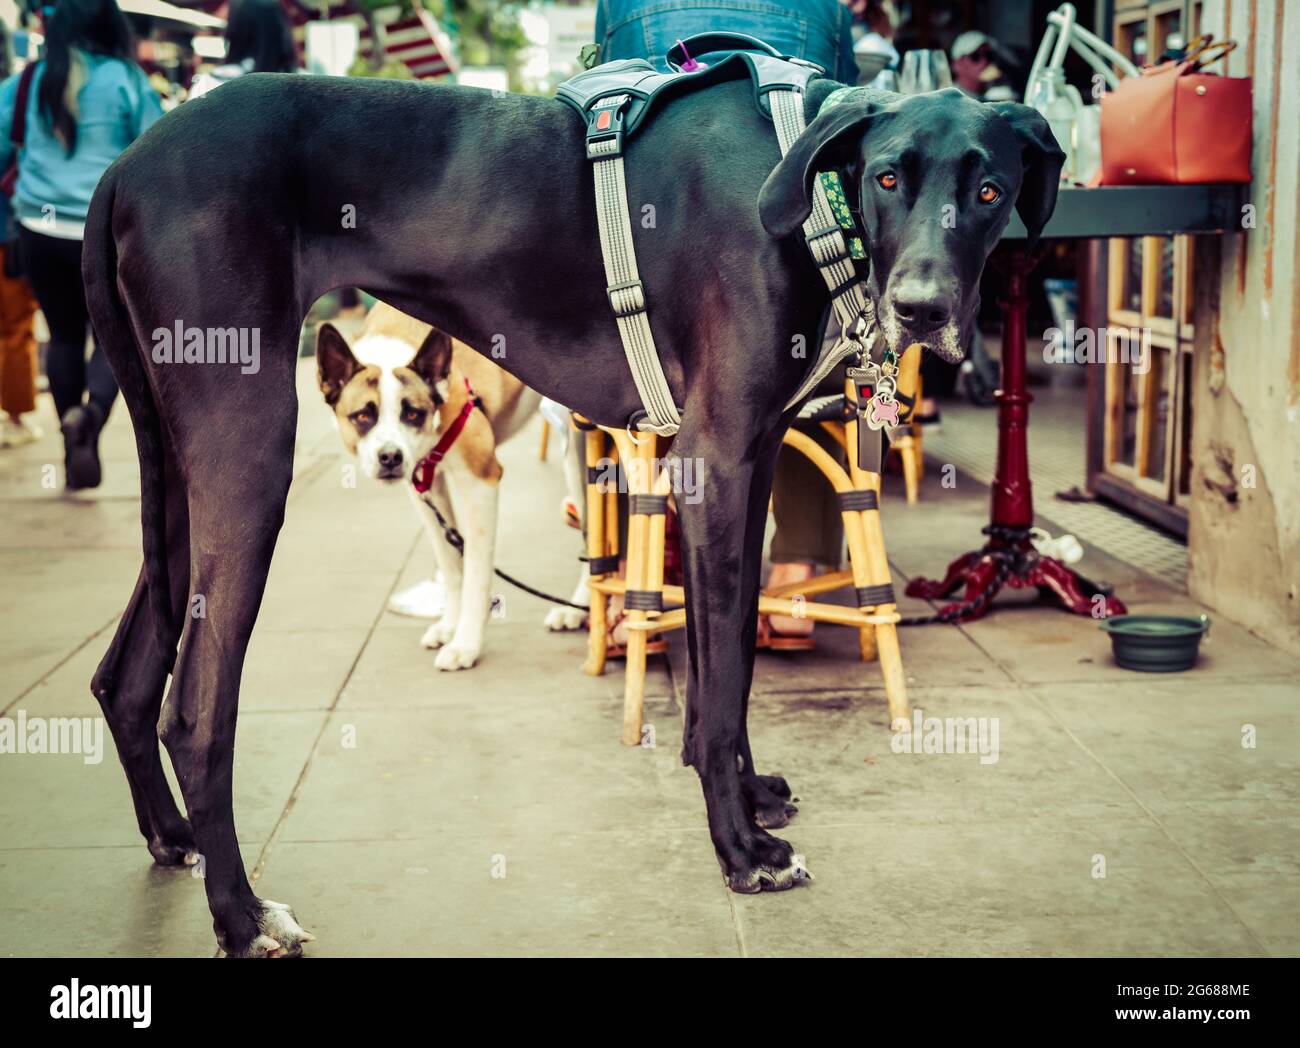 A friendly stare from a large, muscular black Great Dane dog tied up at bistro table on sidewalk with smaller dog staring from underneath, San Diego Stock Photo